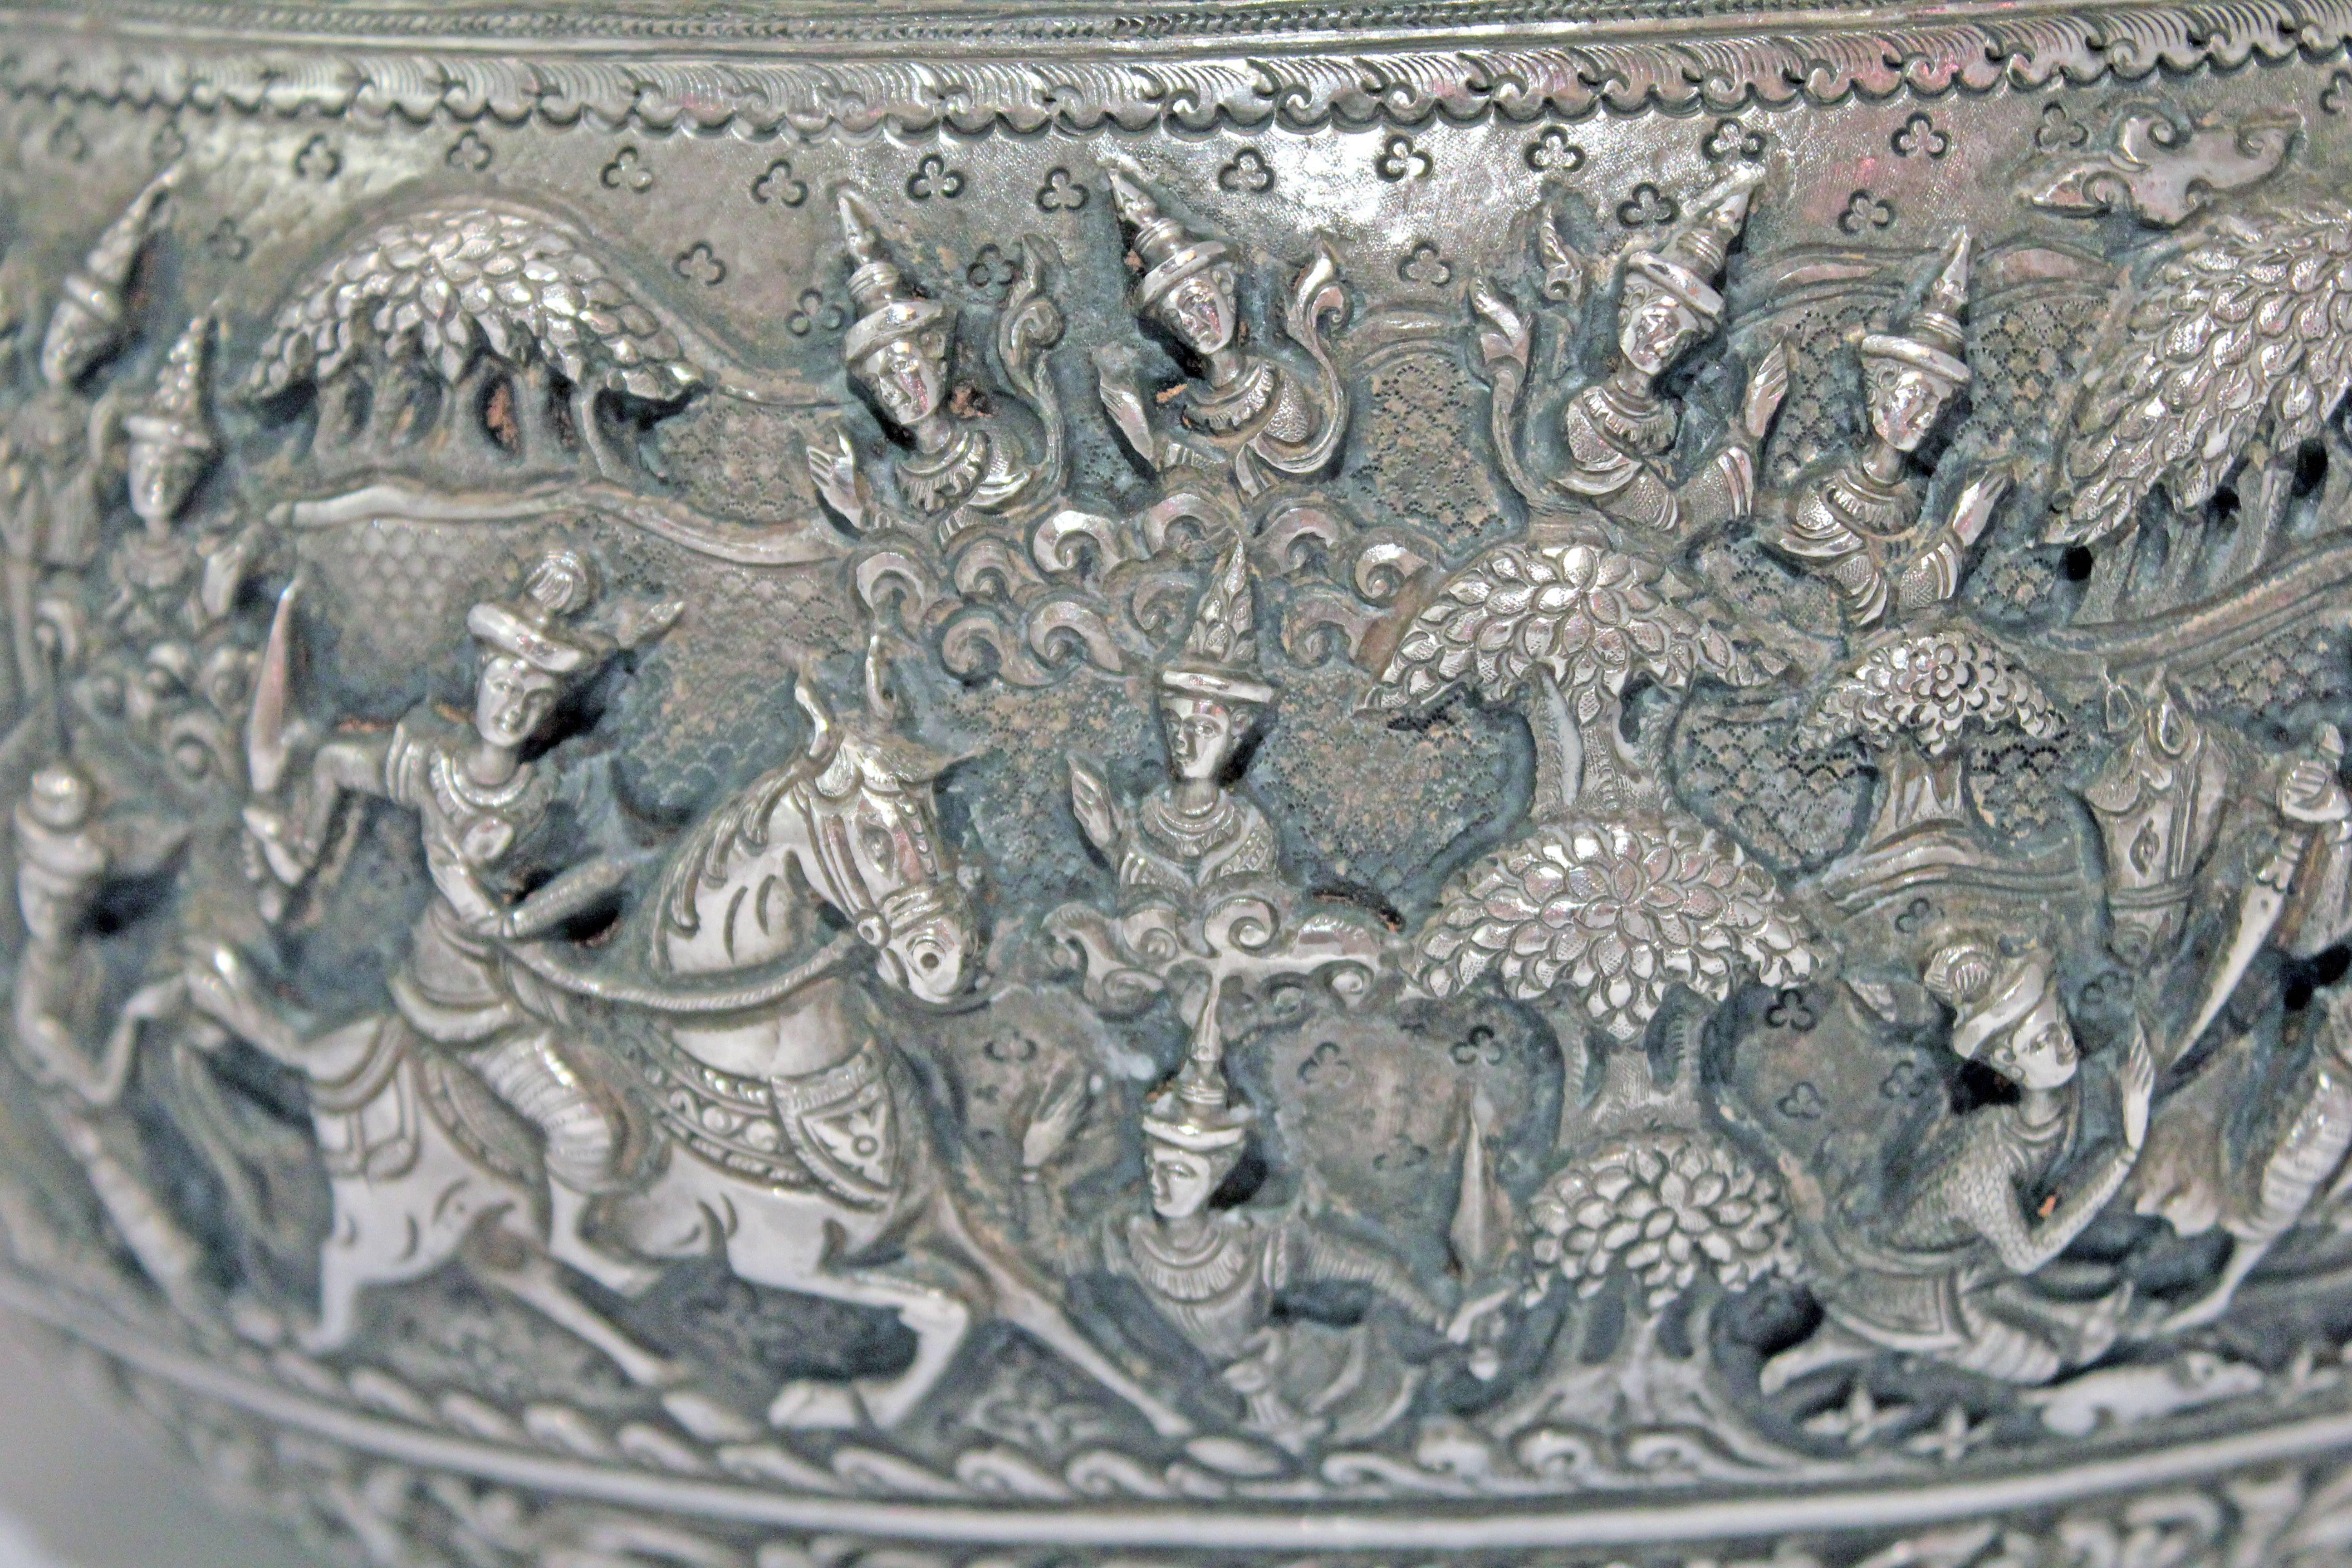 20th Century Solid Silver Hand-Worked Burmese Ceremonial Bowl, Jataka Scenes in Relief, Shan 